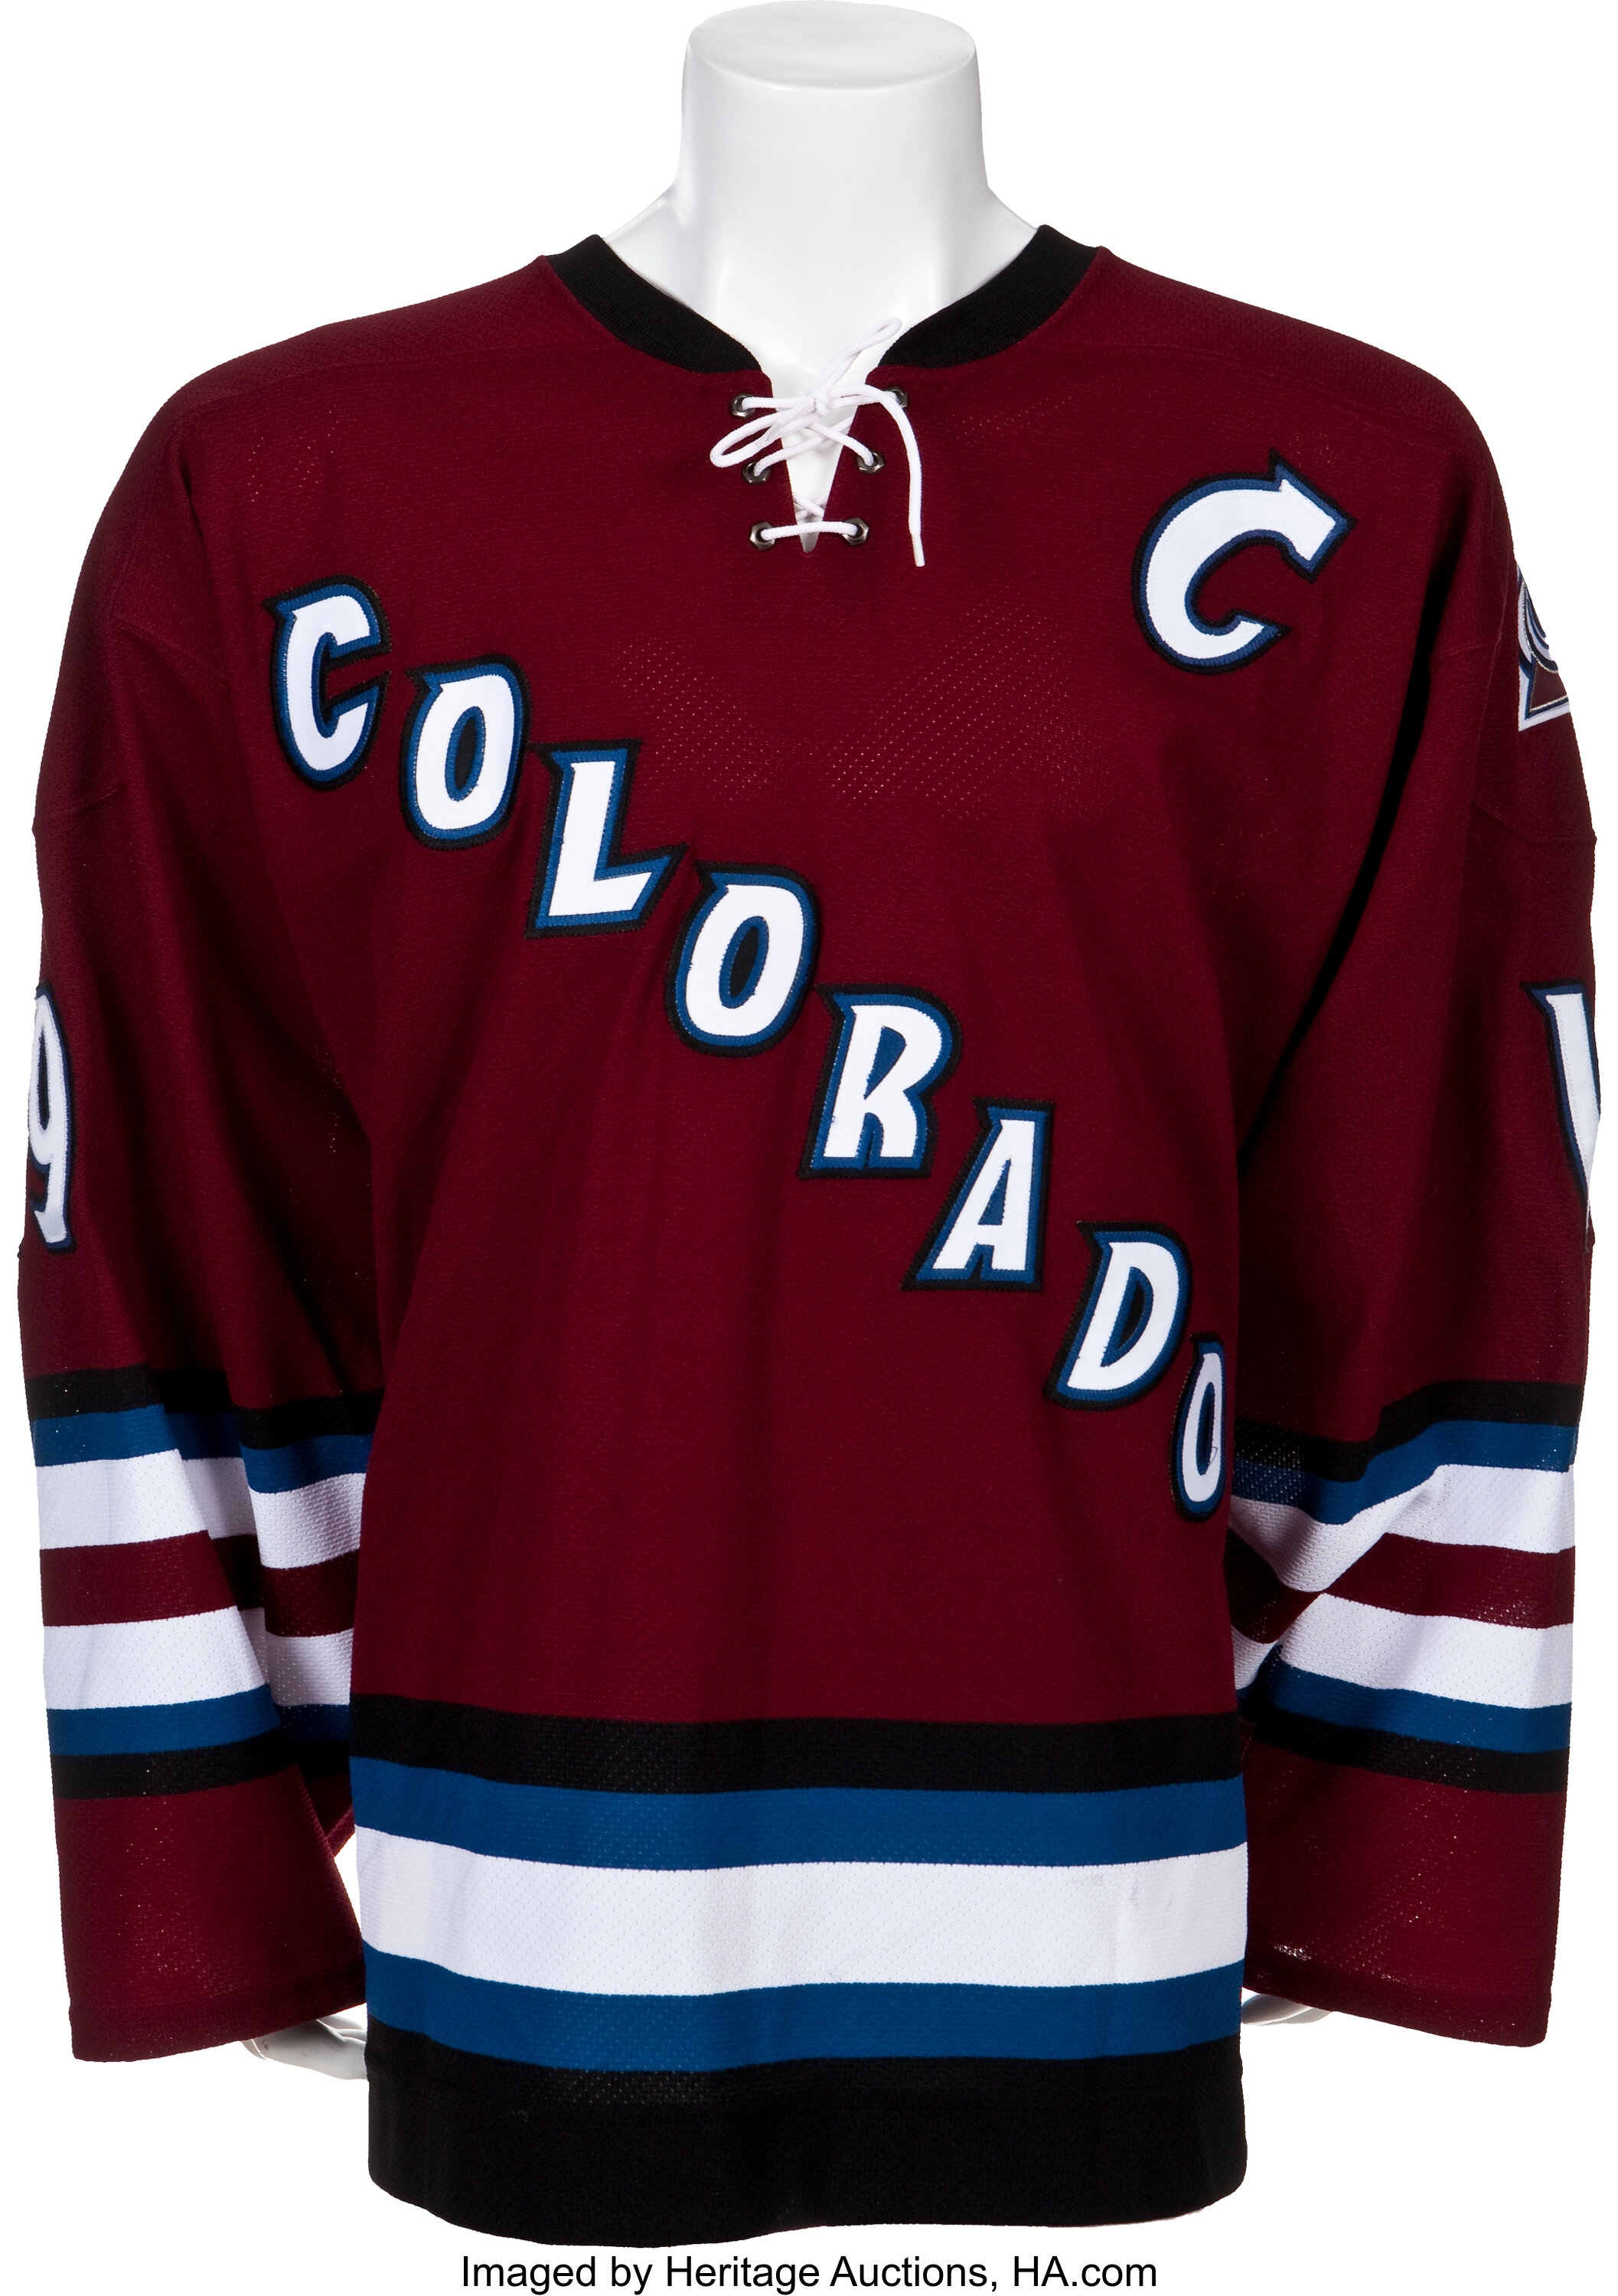 Colorado Avalanche 2003 Team Signed Replica Jersey JSA Authenticated